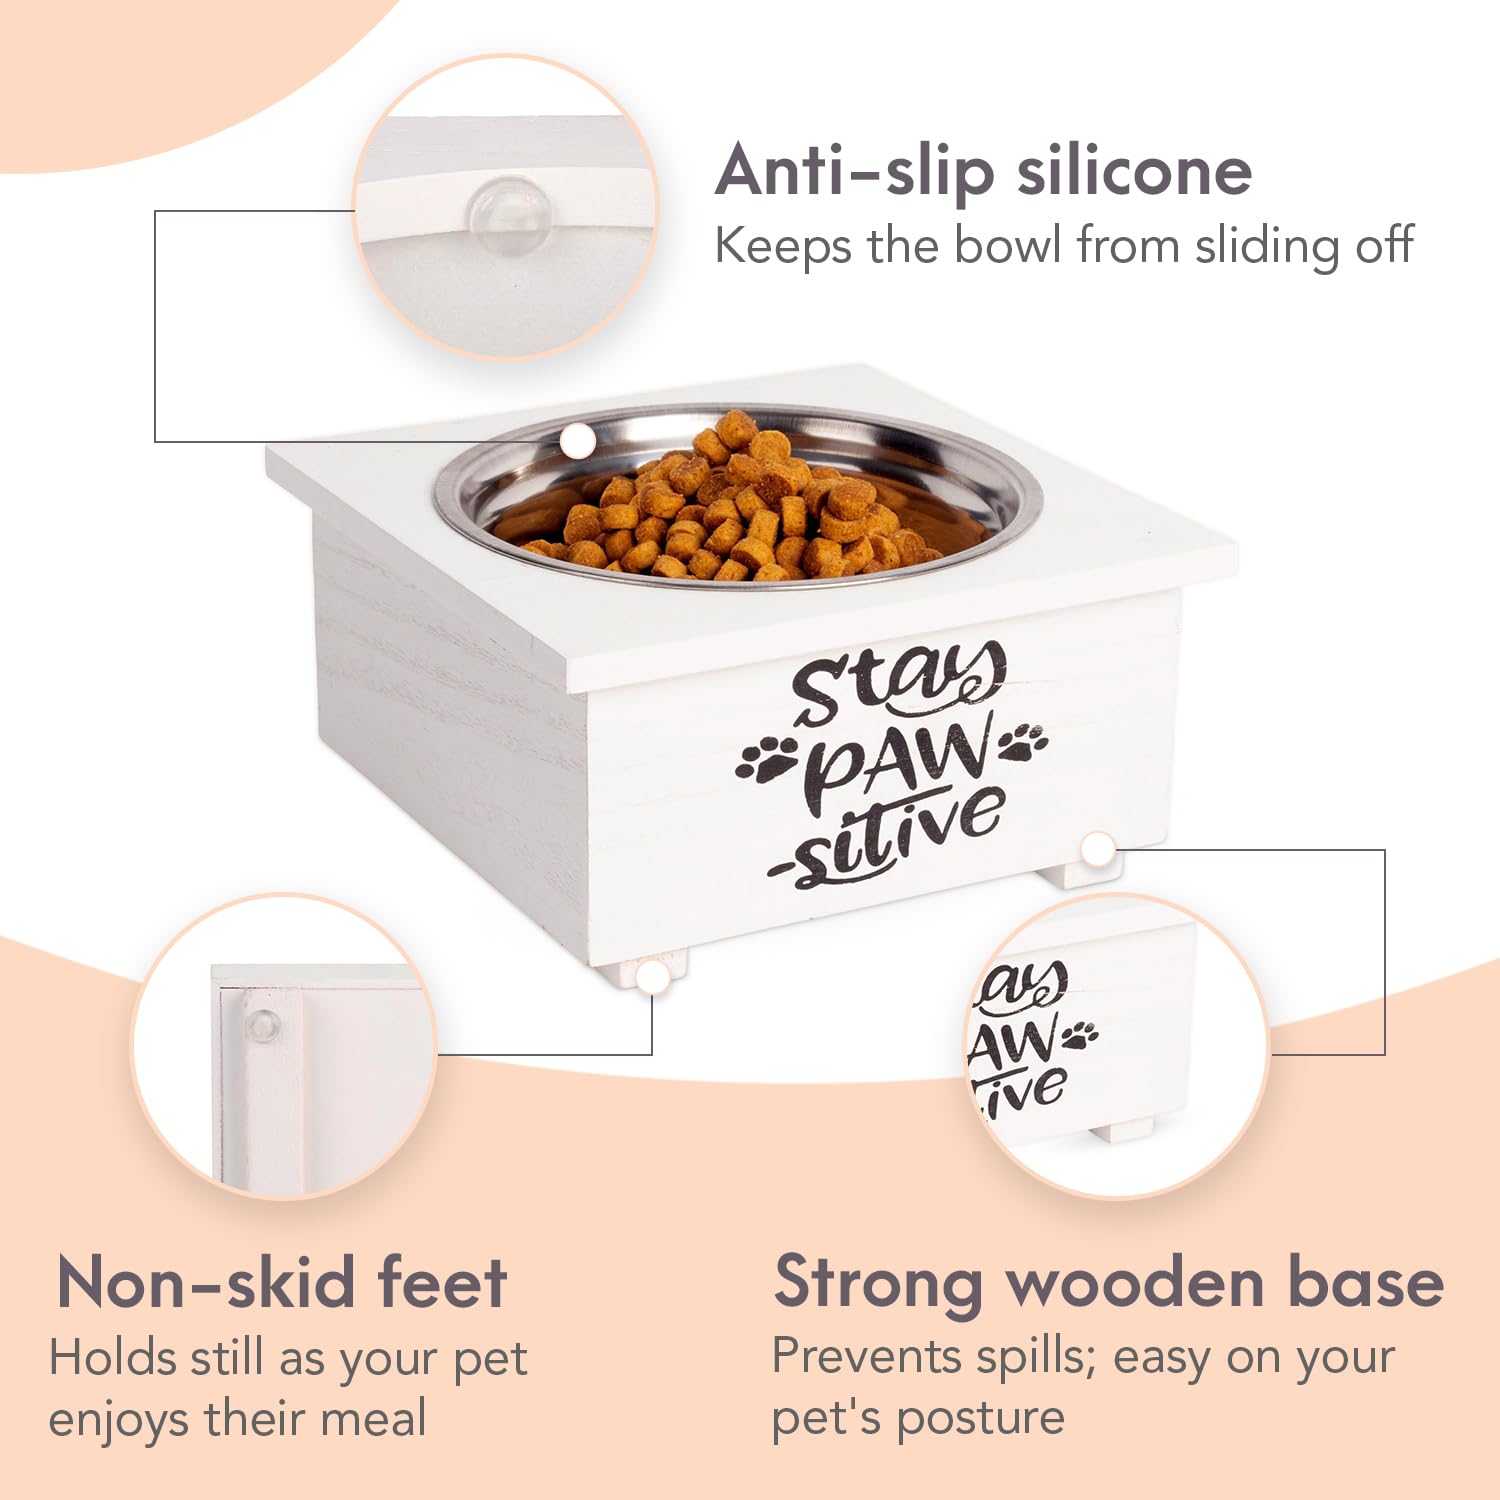 MosJos Elevated Feeding Pet Bowl - Dog, Puppy Supplies, Stainless Steel Bucket with Wooden Base, Pet Bowl Features Text Design, Your Pets and Puppies. Dishwasher Safe  - Like New